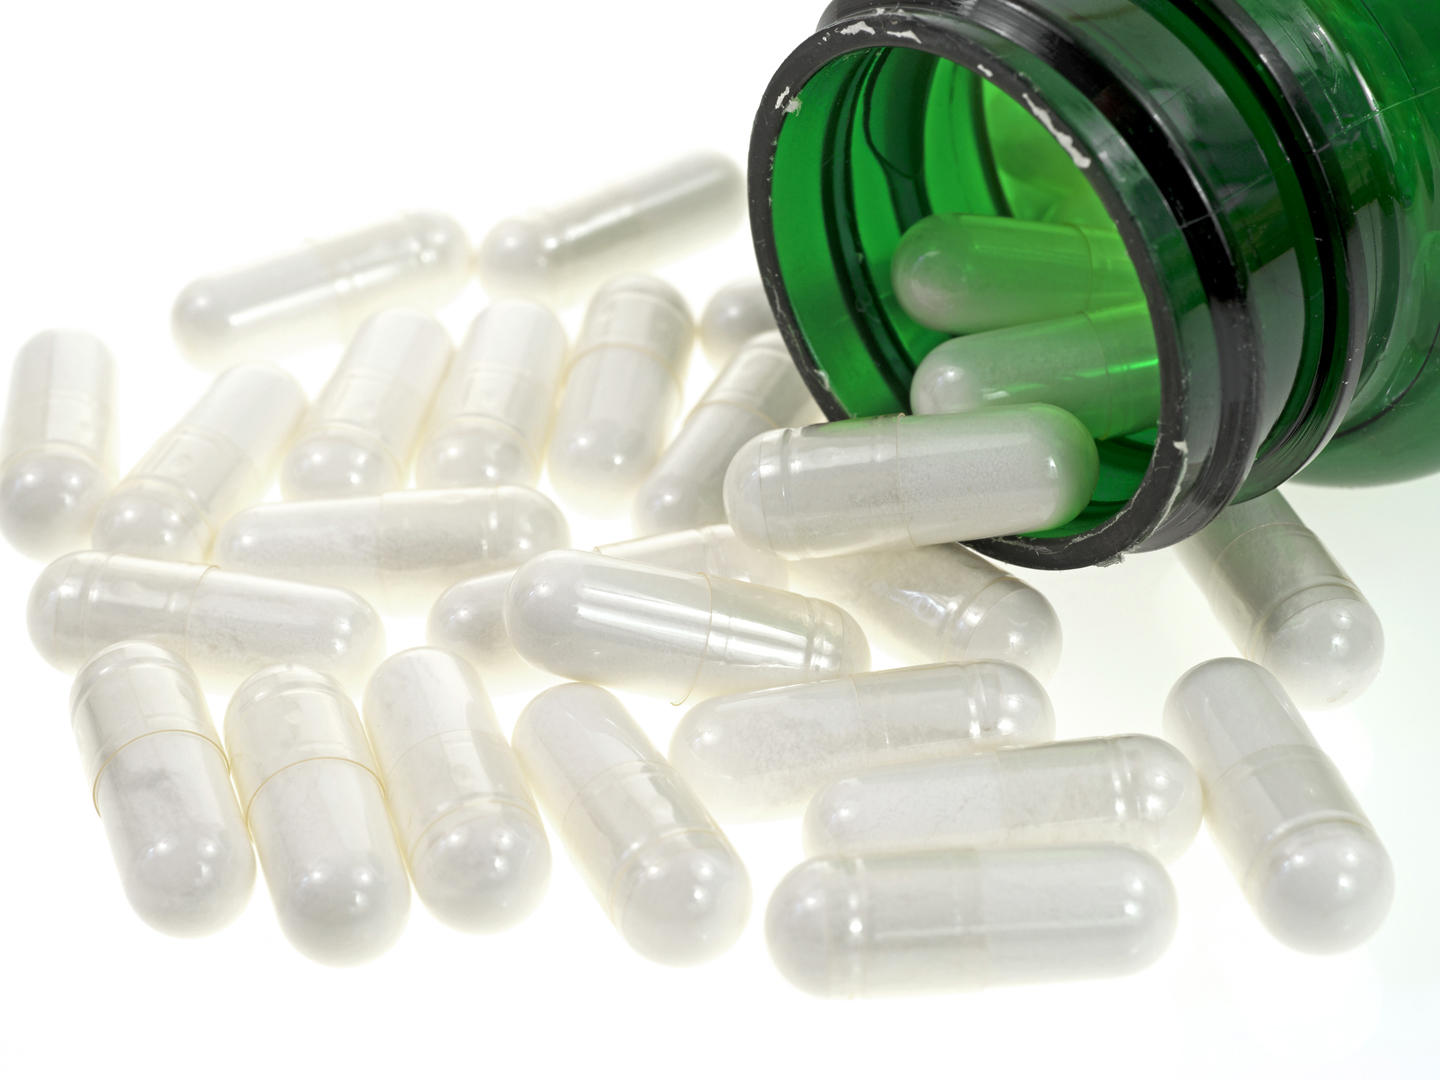 A close view of several acidophilus capsules spilling from a green vitamin bottle.